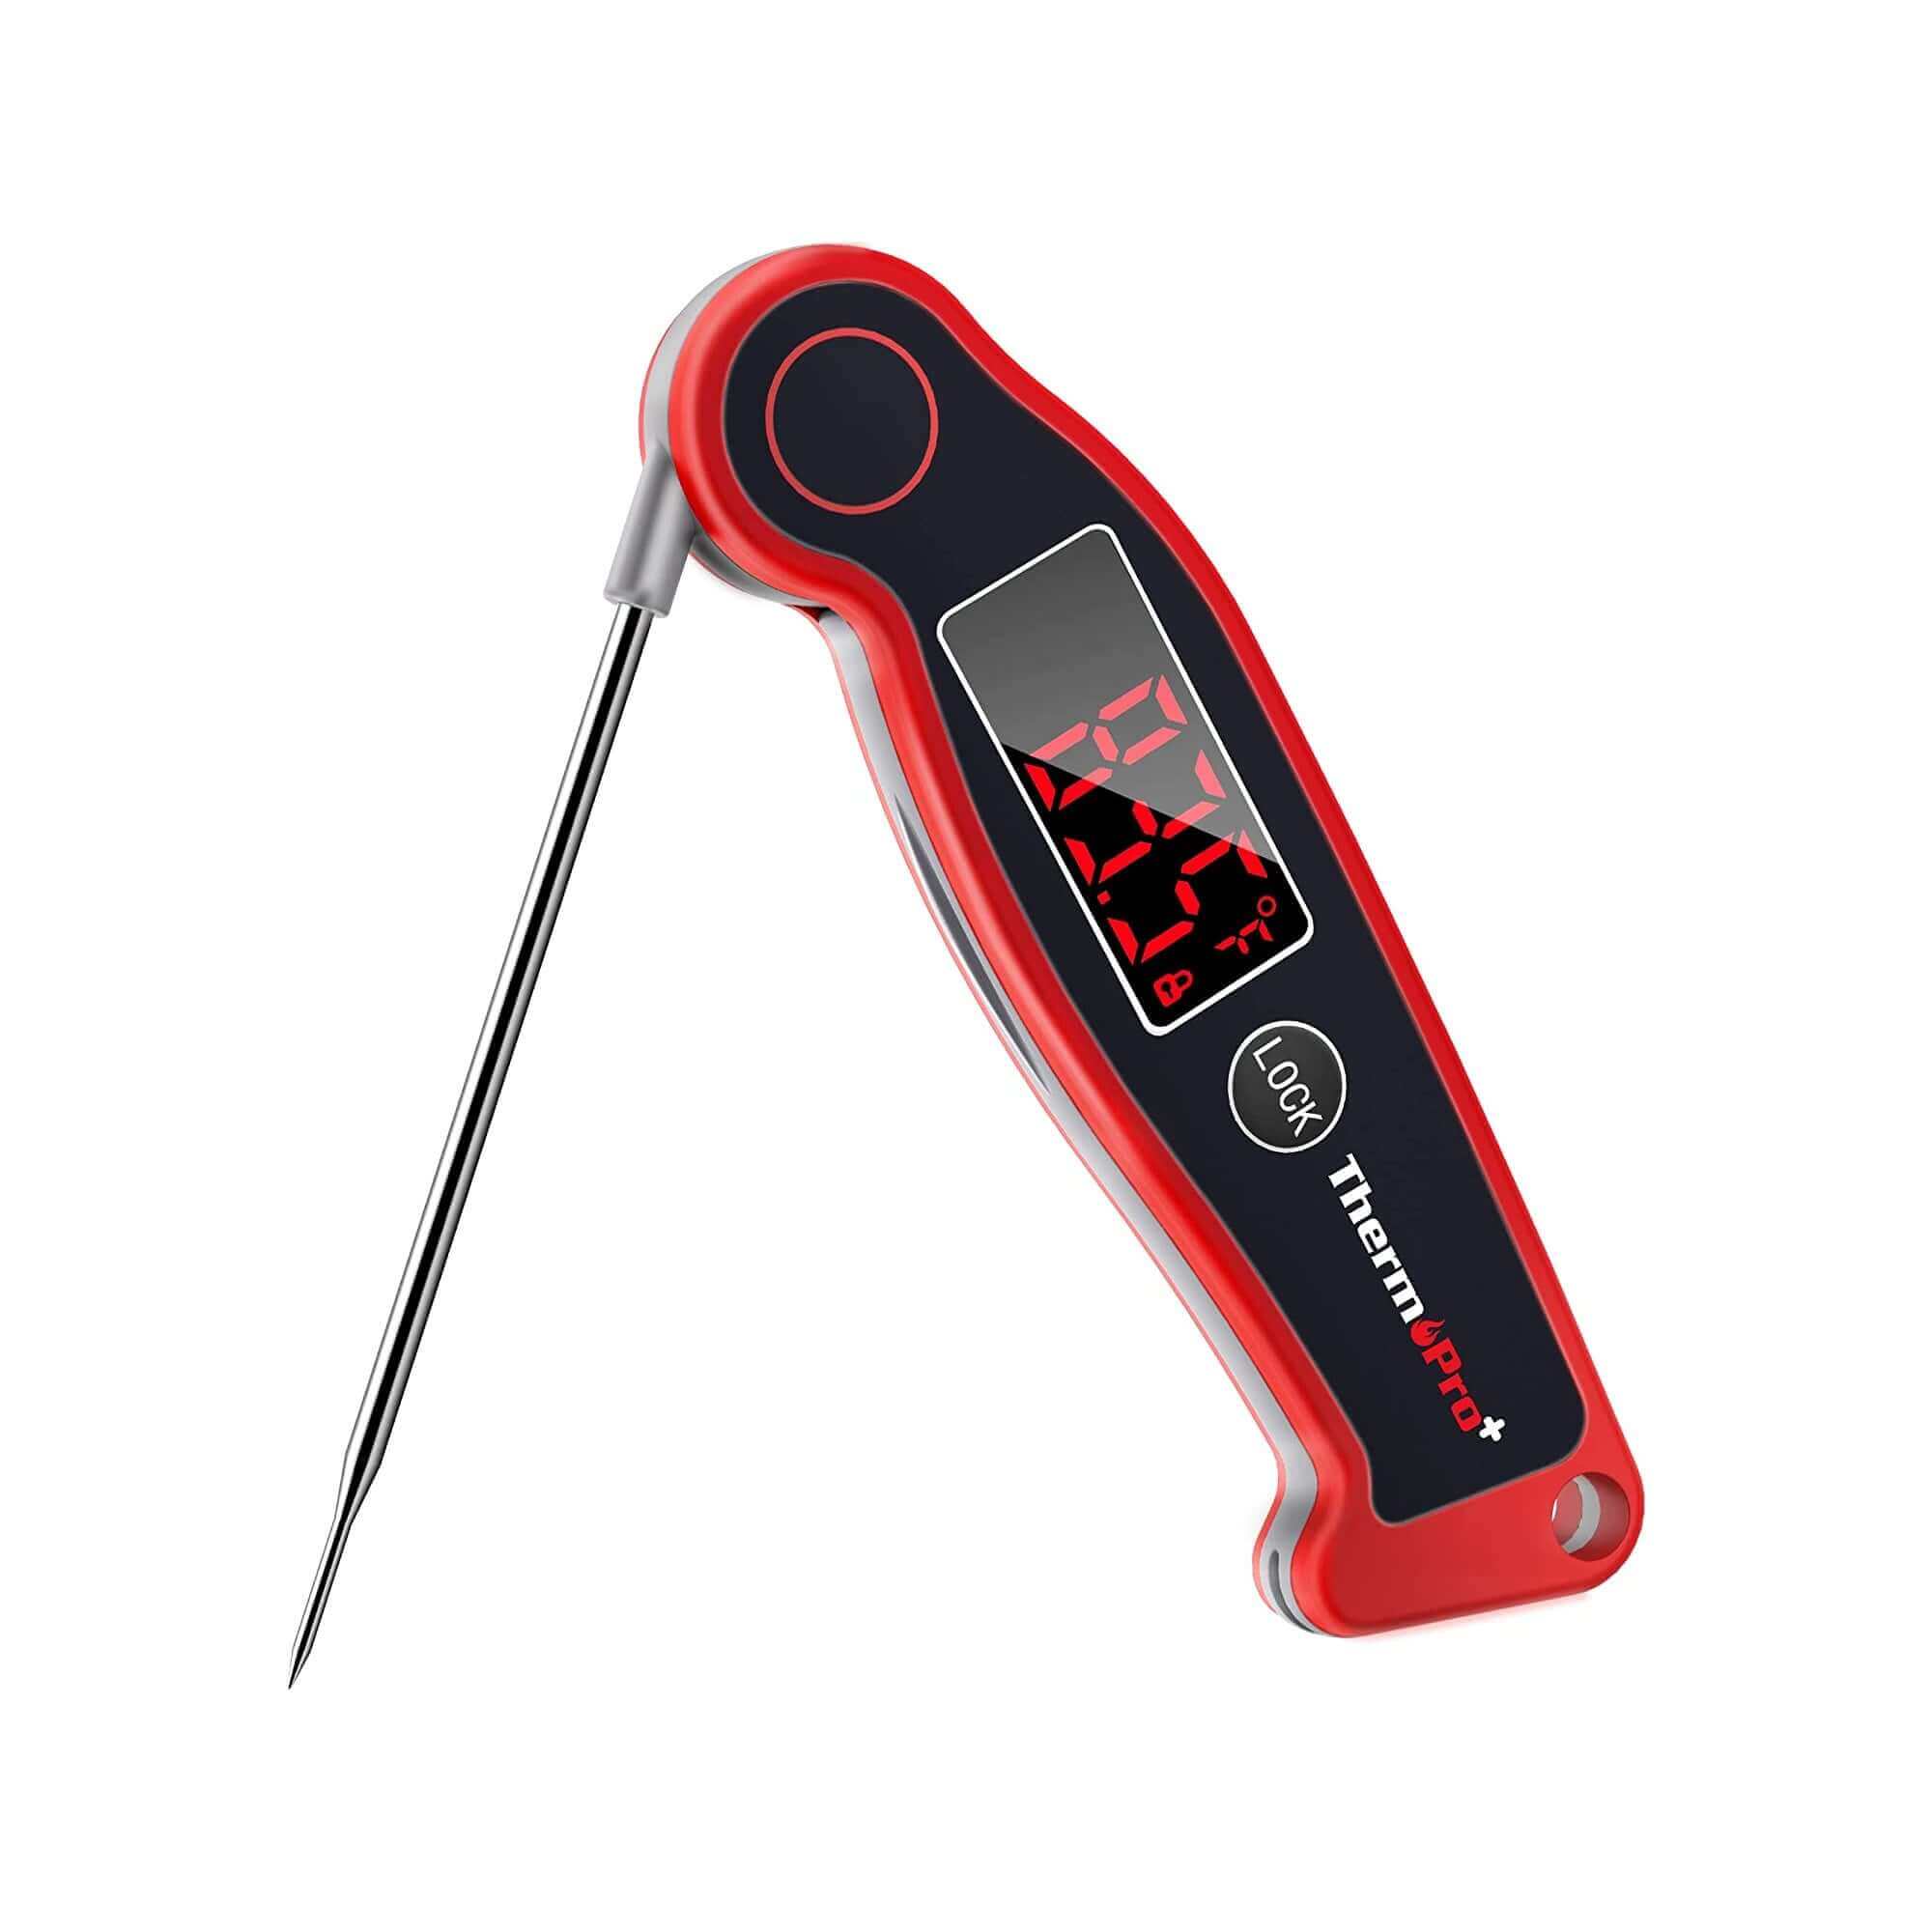 ThermoPro TP25 Bluetooth Meat Thermometer User Guide